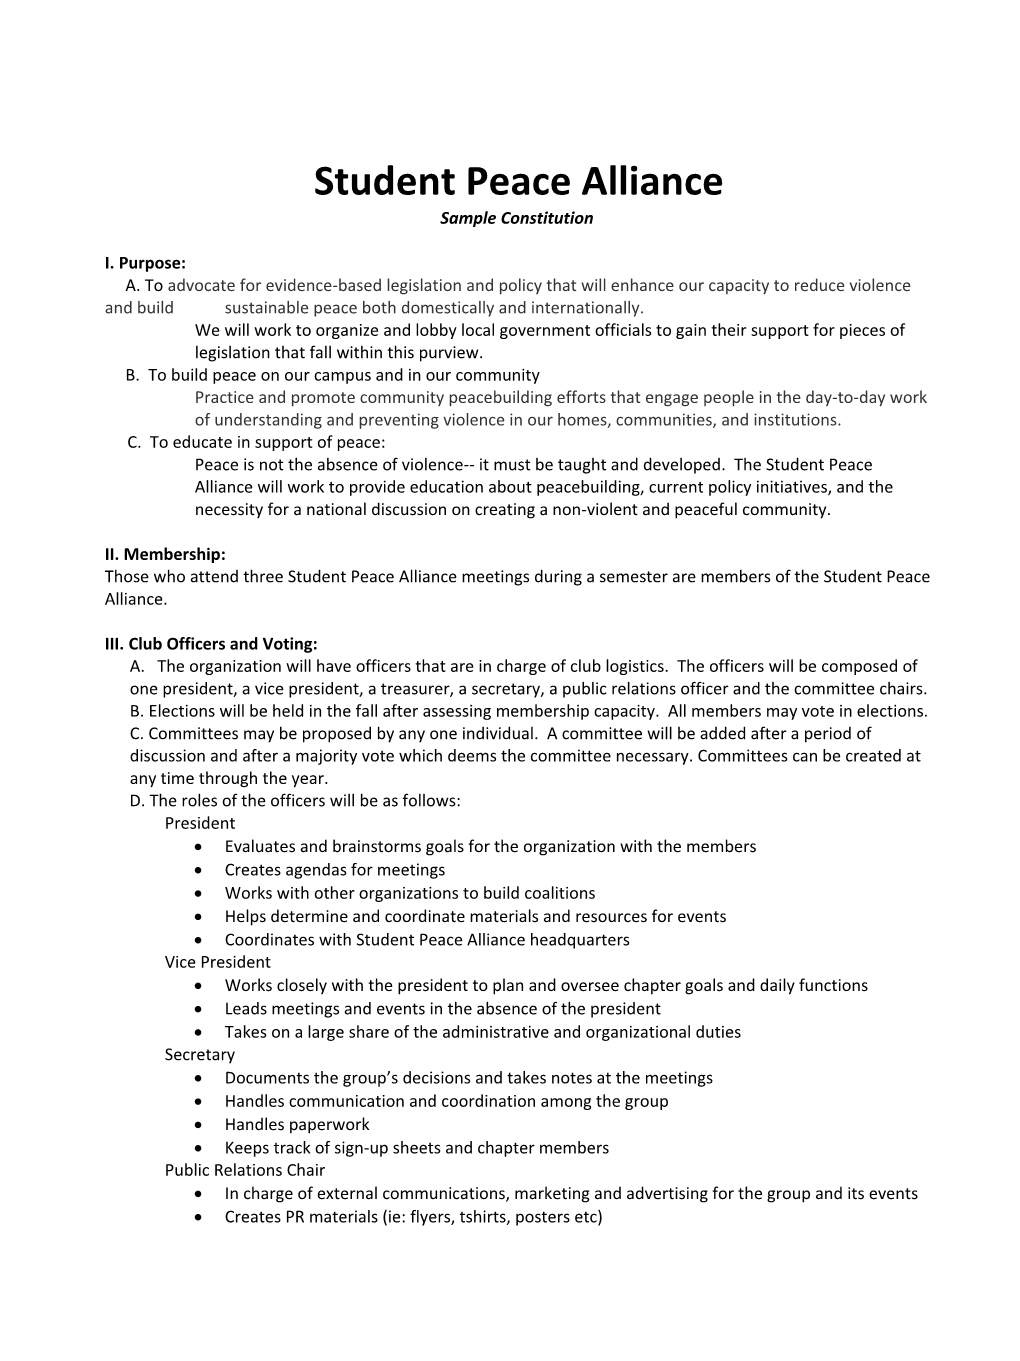 SPA (Student Peace Alliance) Constitution